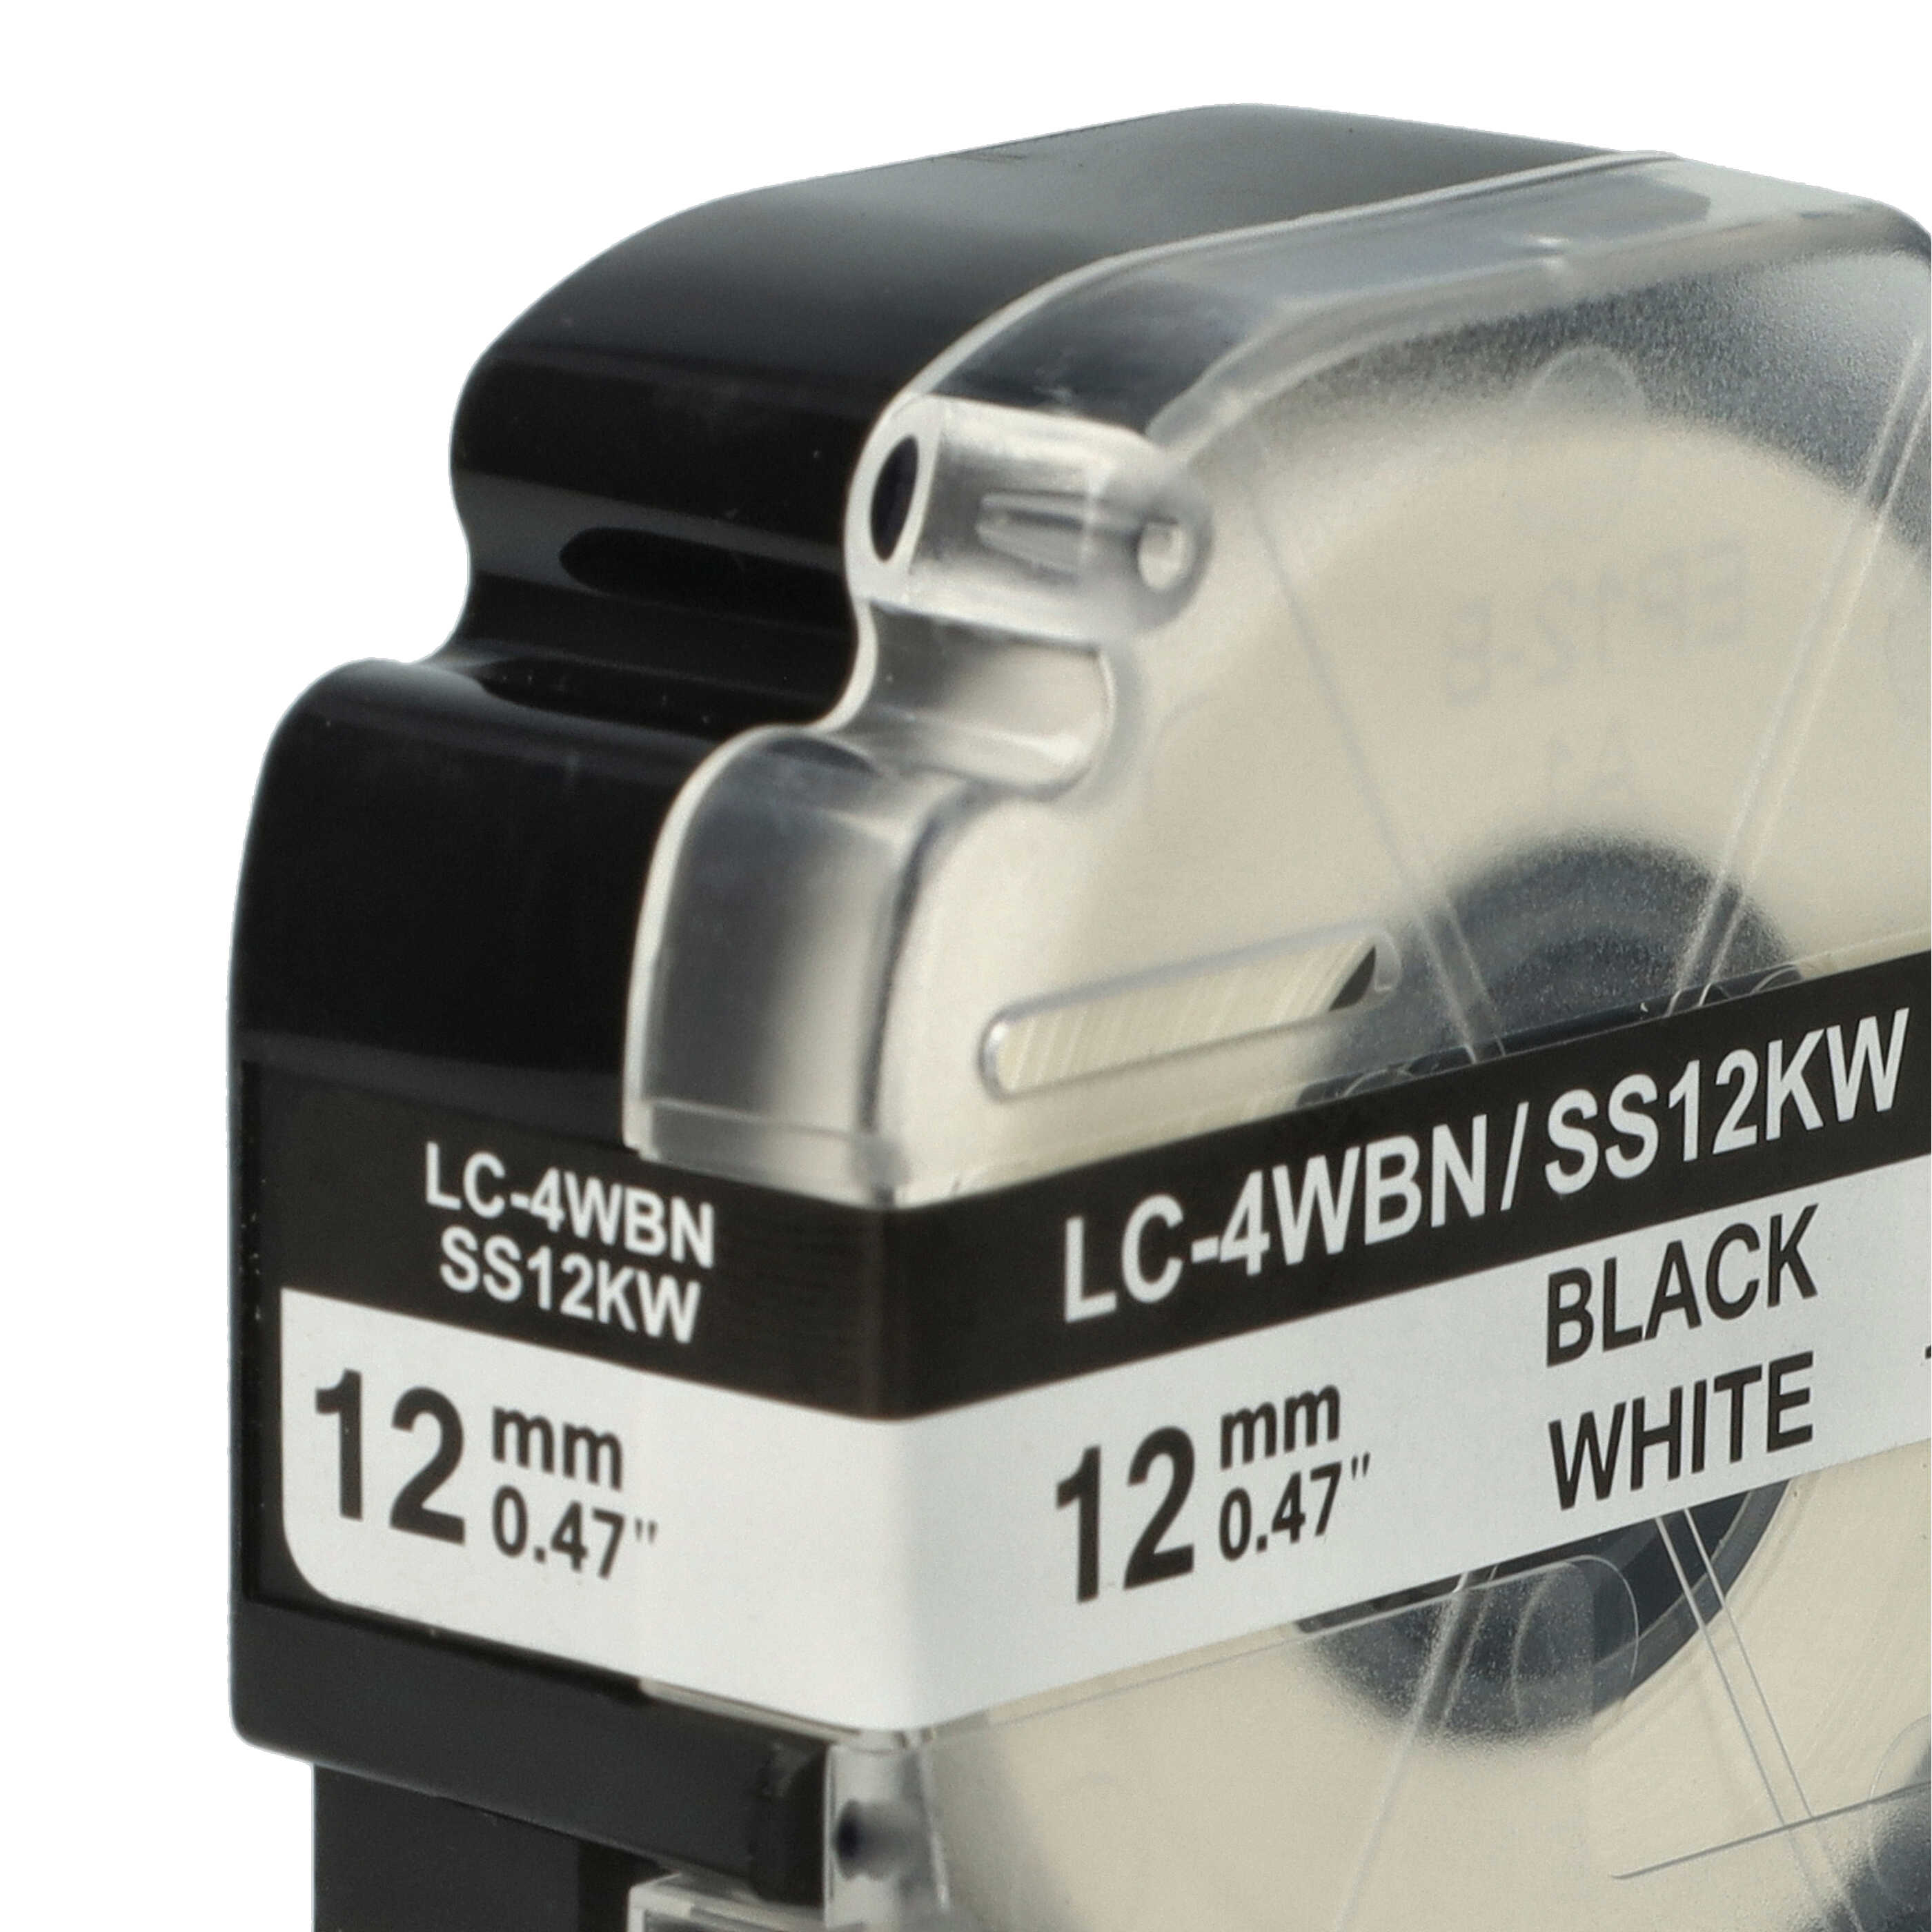 2x Label Tape as Replacement for Epson SS12KW, LC-4WBN - 12 mm Black to White